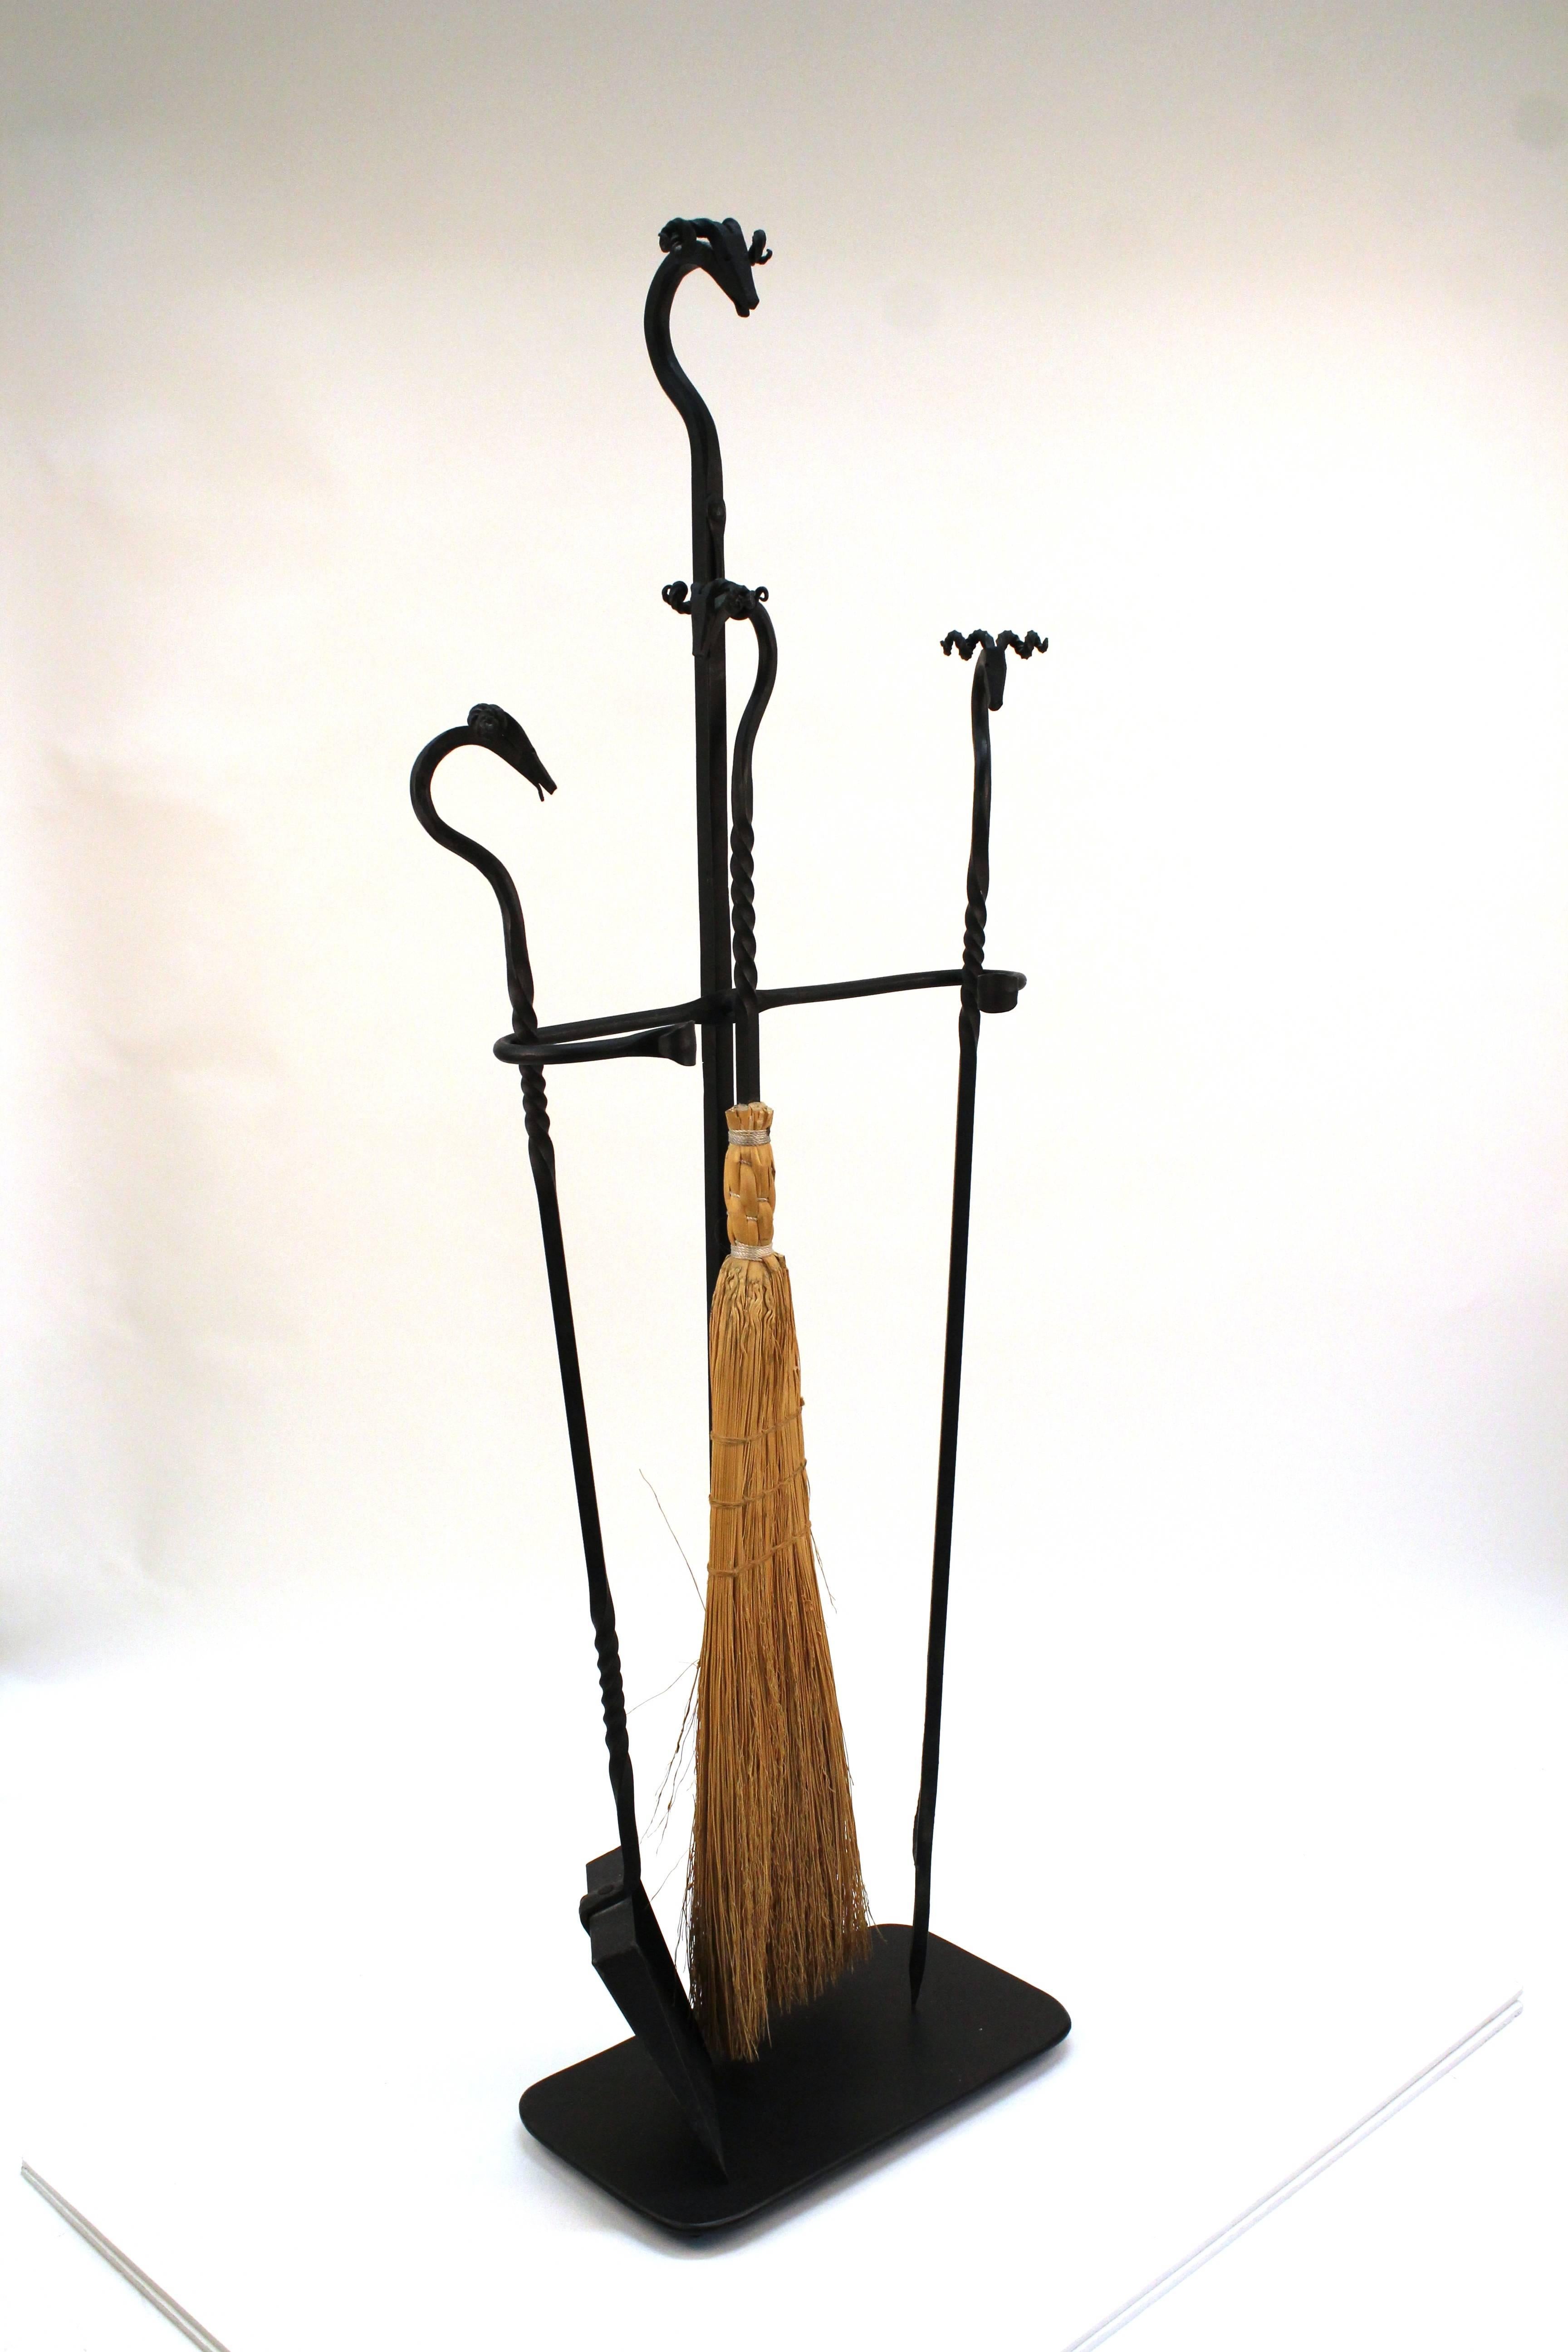 A set of fireplace tools crafted in wrought iron. The stand and tools each have a ram's head handle. Some wear due to age and use, in good condition.